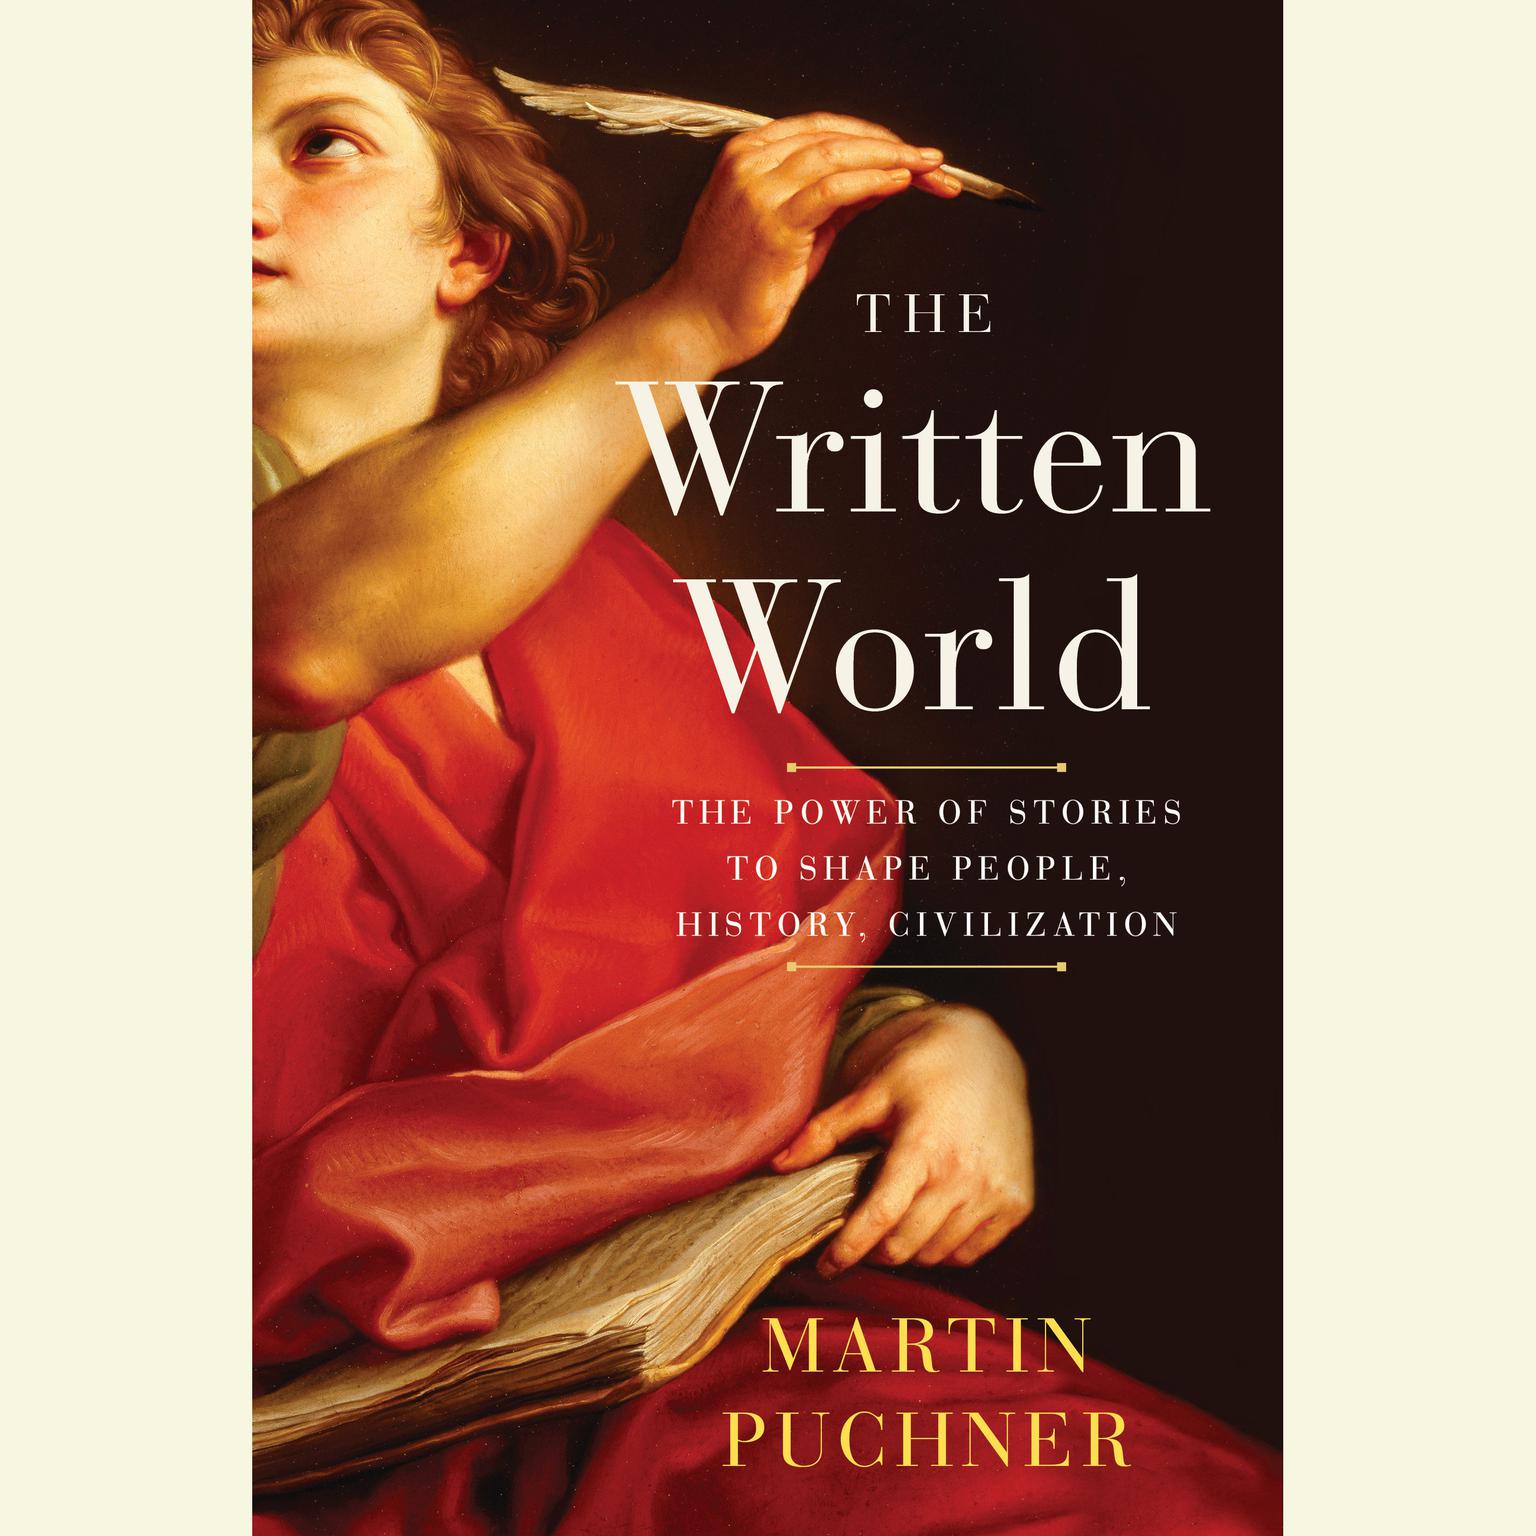 The Written World: The Power of Stories to Shape People, History, Civilization Audiobook, by Martin Puchner